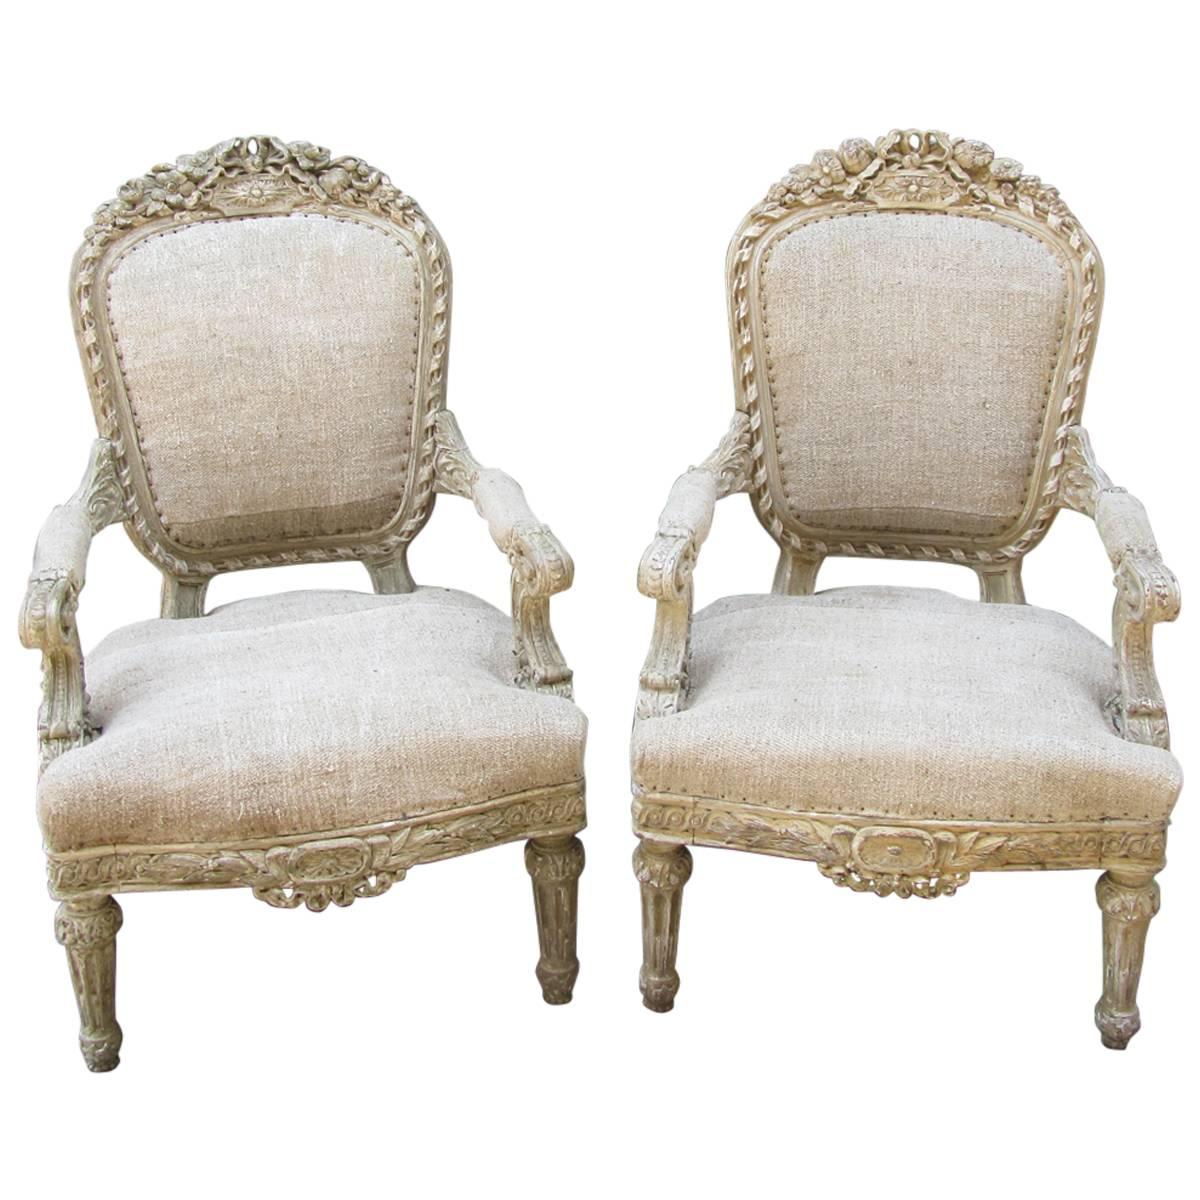 Pair of 19th C French Louis XIV Style Carved Fauteuil Chairs